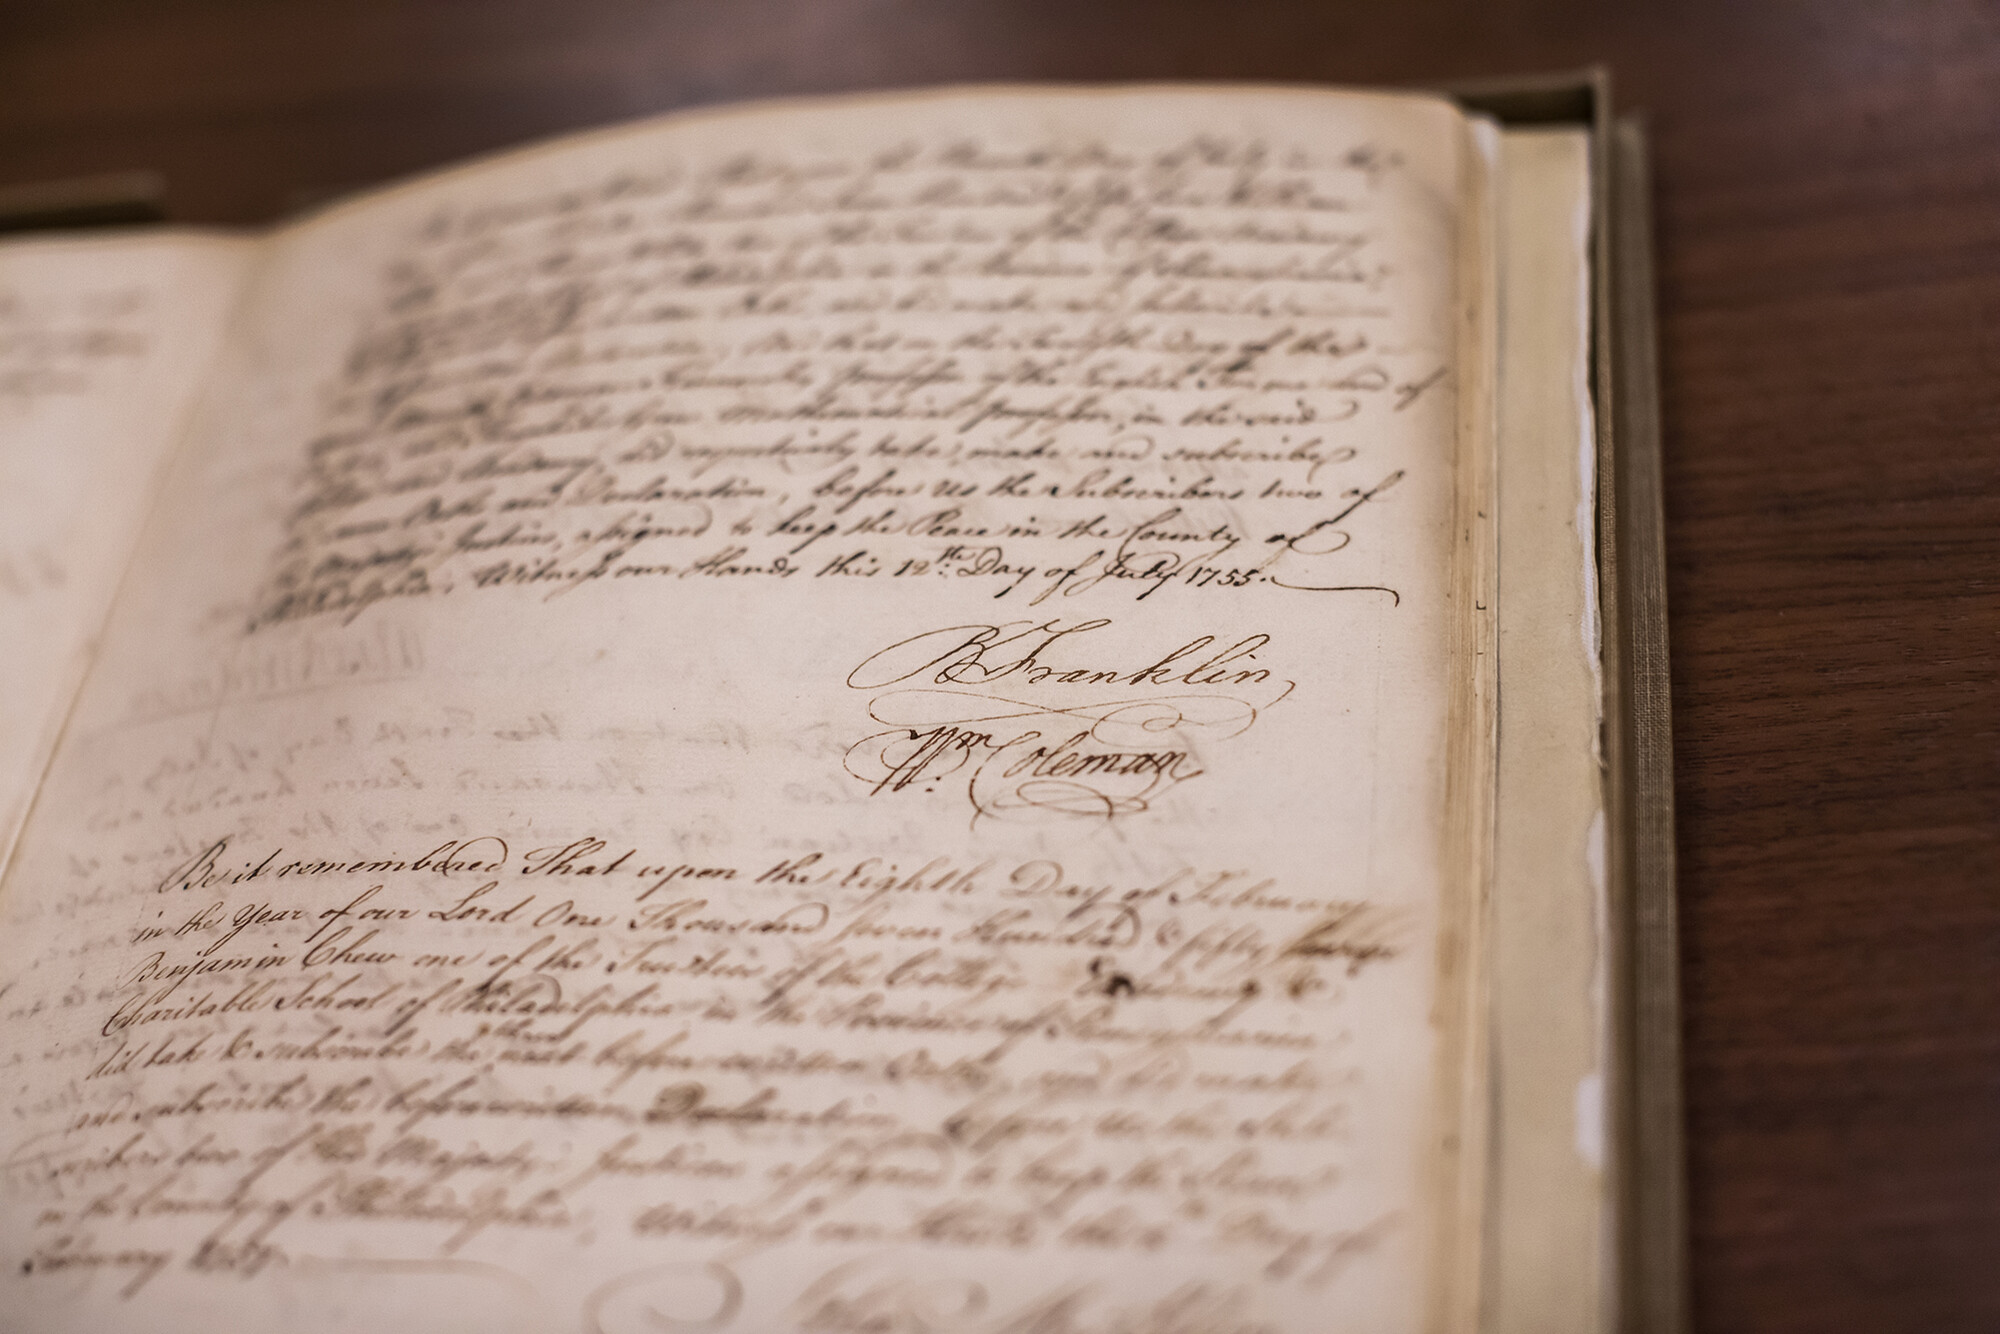 A historic book from Penn Archives with Ben Franklin’s signature.